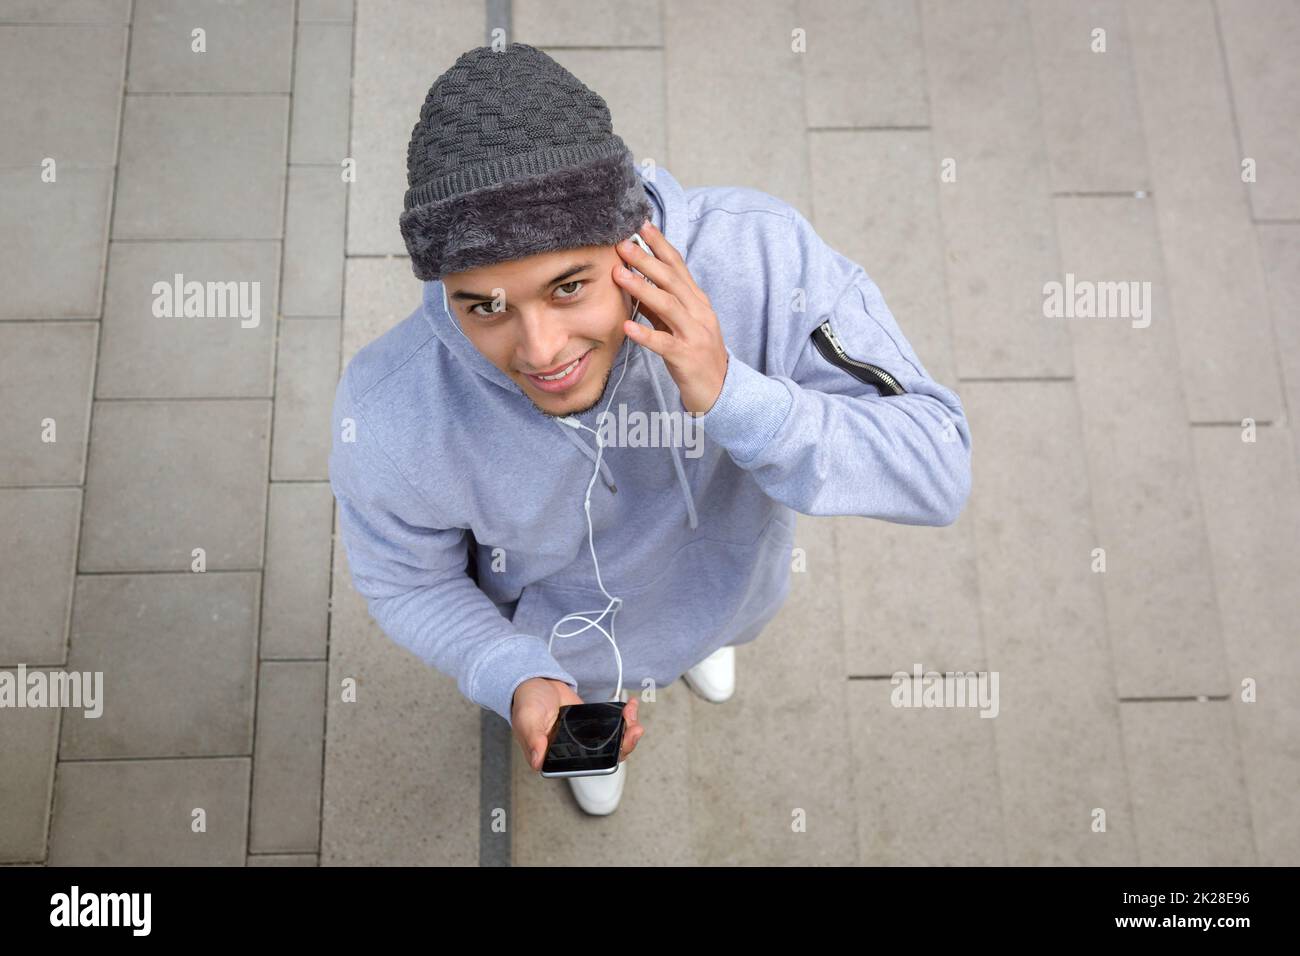 Listening to music smiling young latin man runner sports training from above Stock Photo